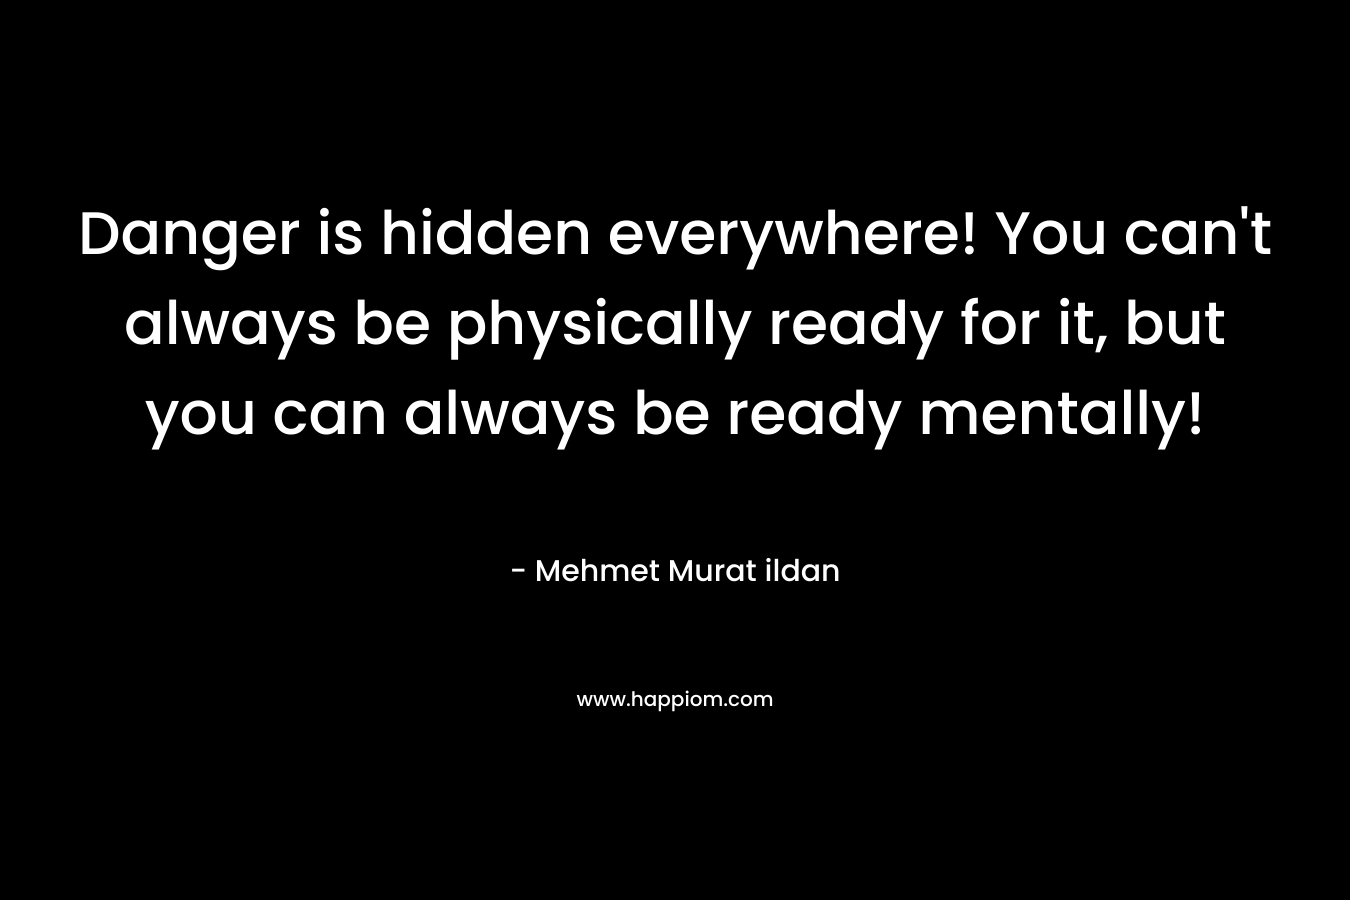 Danger is hidden everywhere! You can't always be physically ready for it, but you can always be ready mentally!